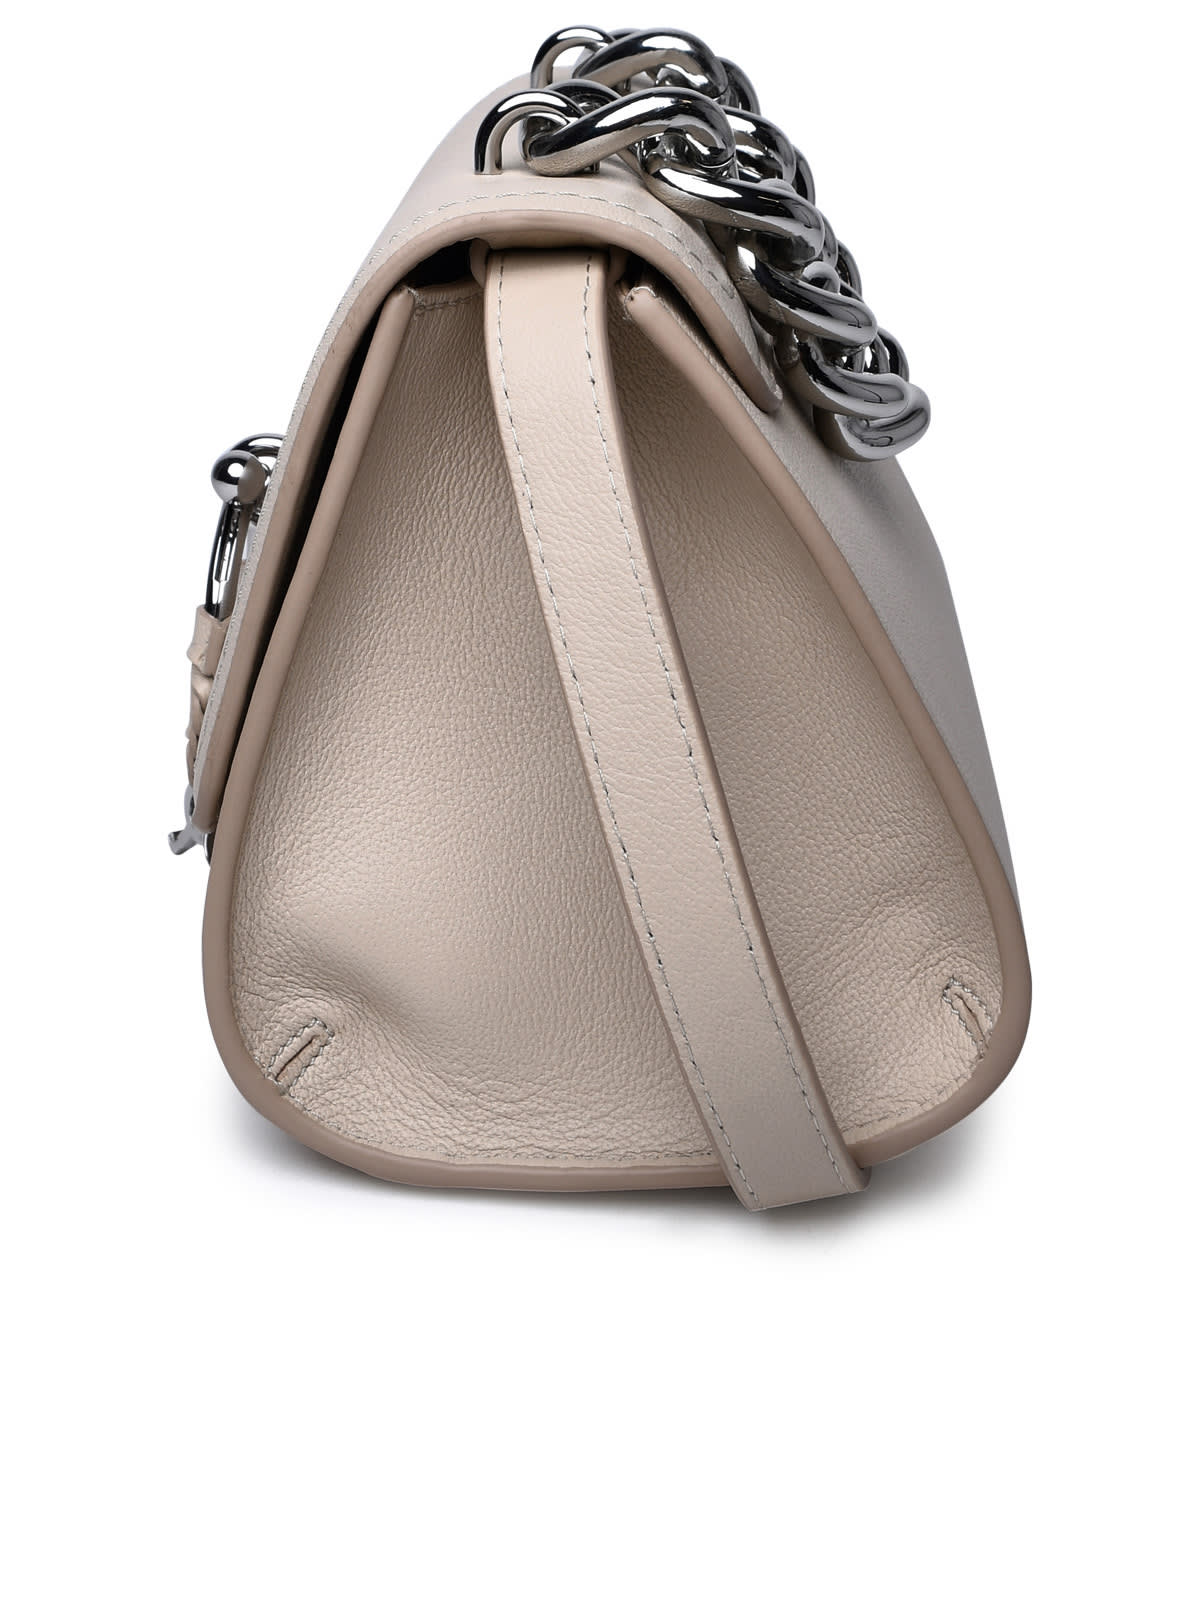 Shop See By Chloé Beige Leather Bag